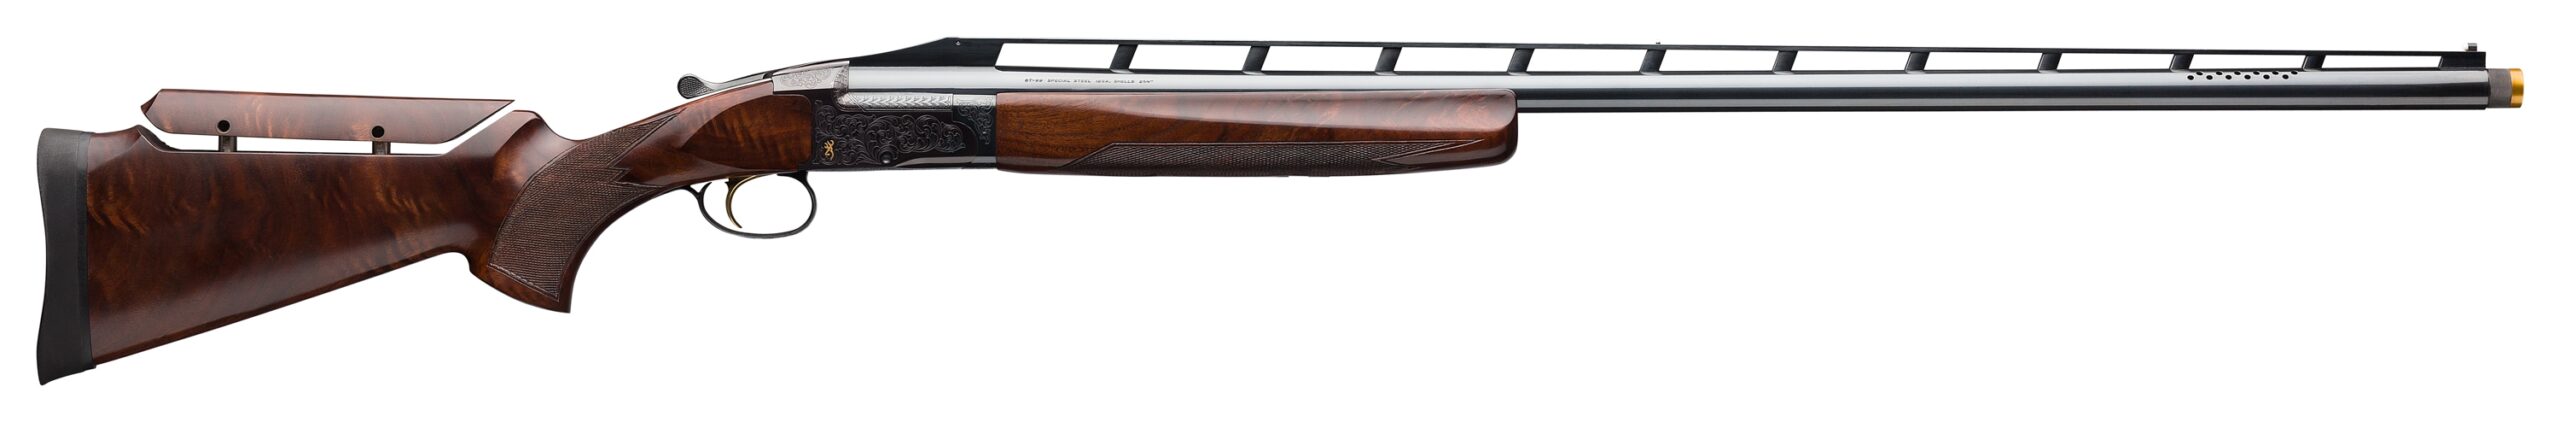 The BT-99 is a good option for trap shooters.